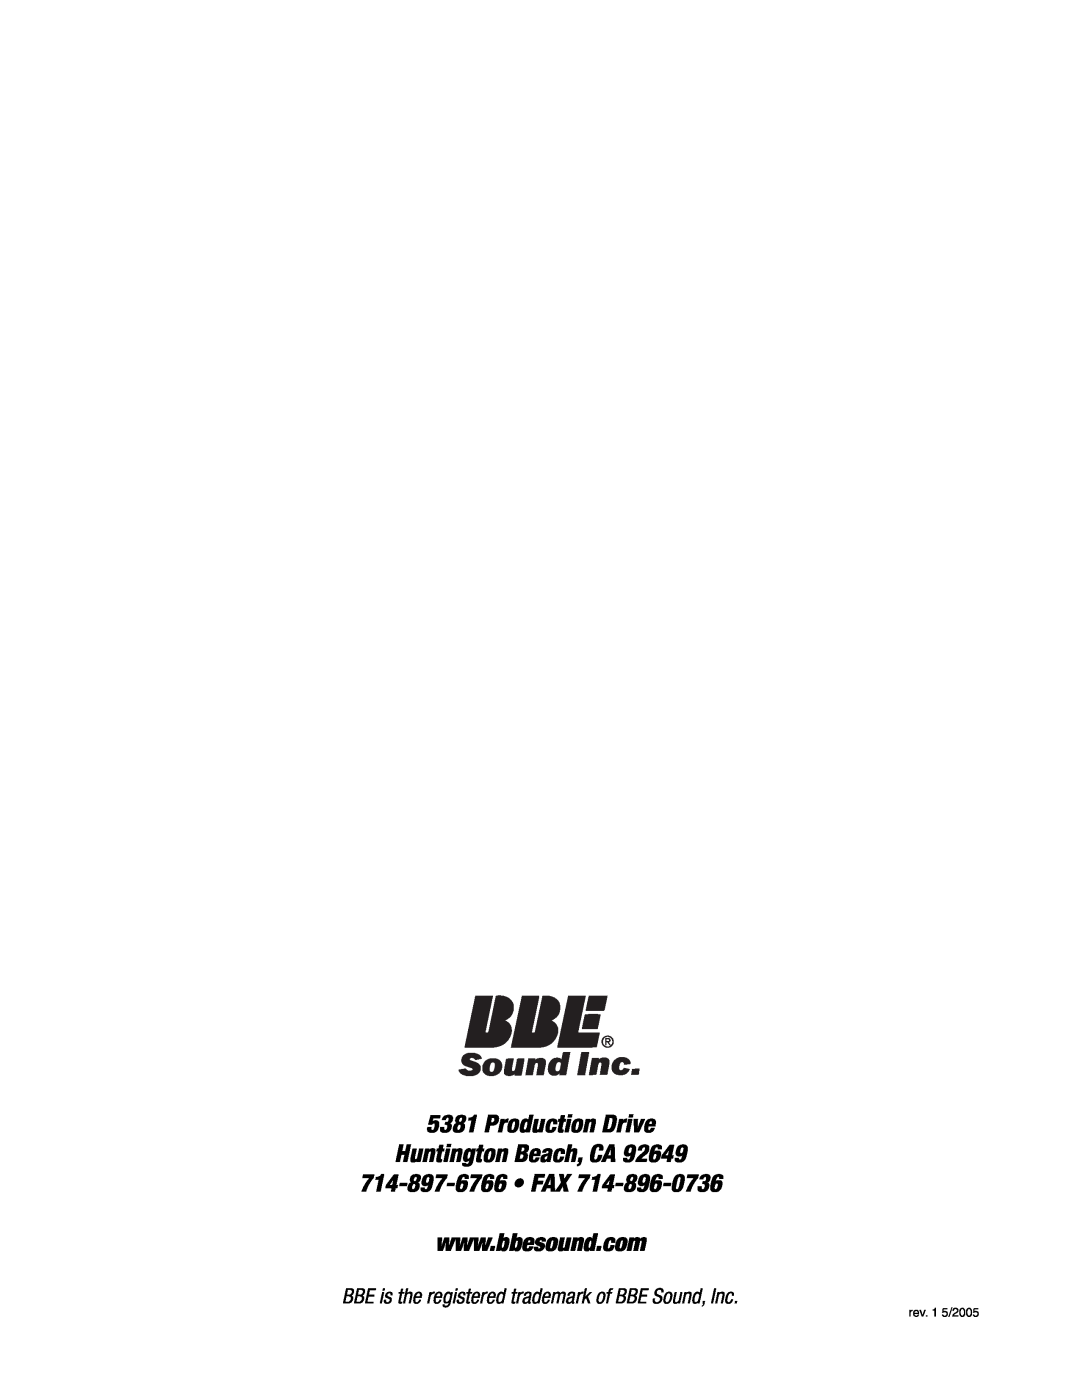 BBE EQA131, EQA215 Production Drive Huntington Beach, CA, BBE is the registered trademark of BBE Sound, Inc, rev. 1 5/2005 